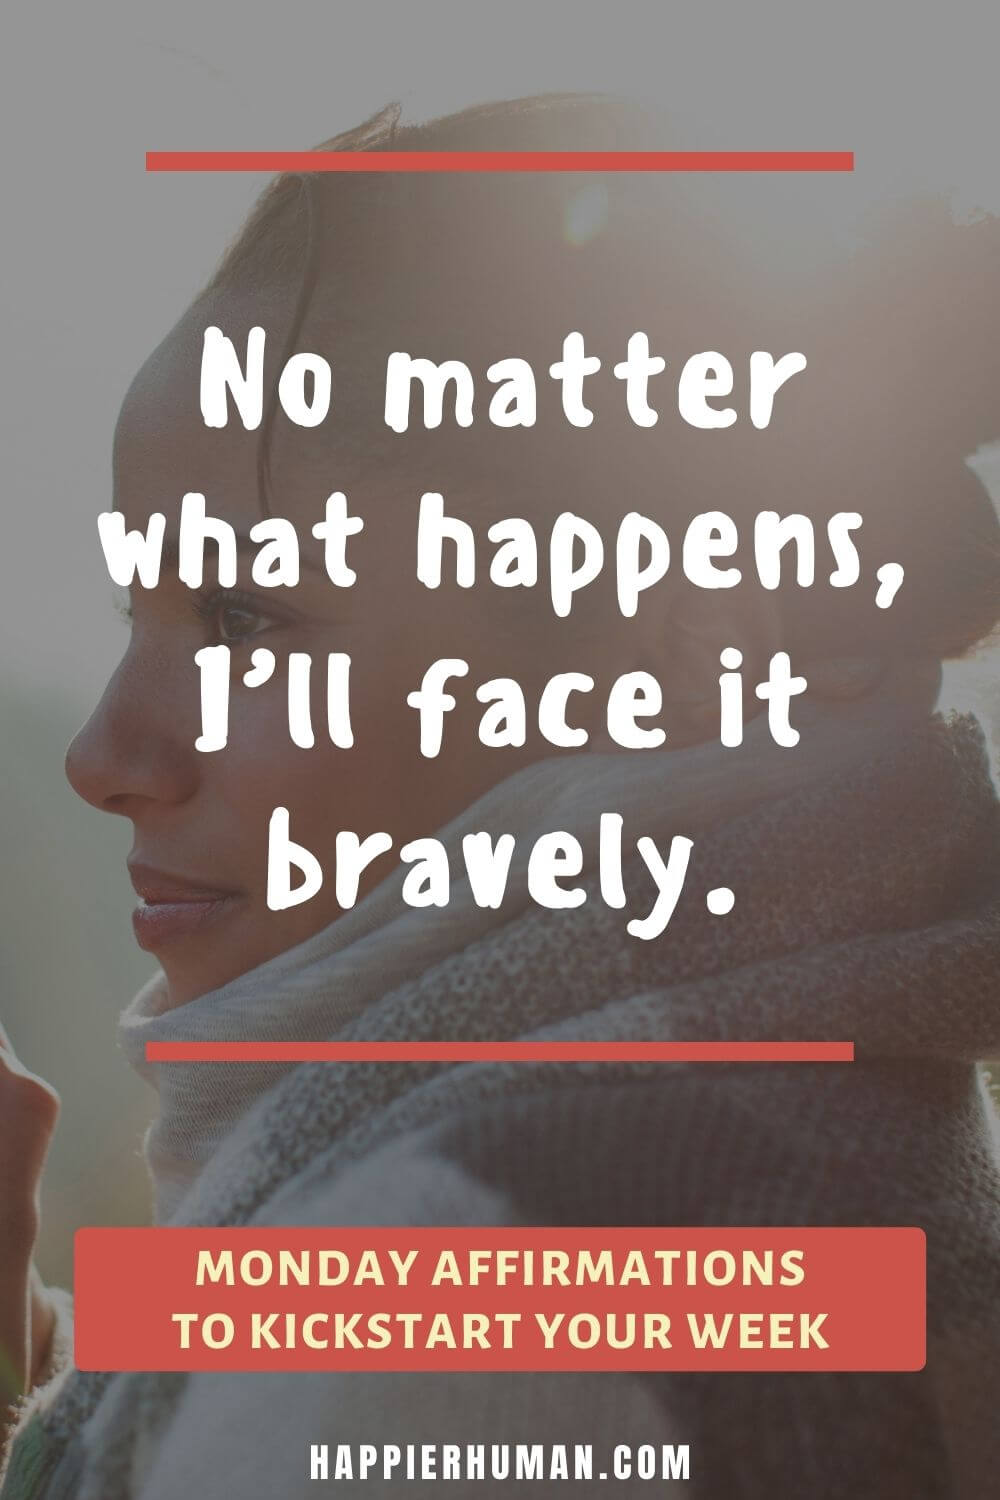 Monday Affirmations - No matter what happens, I’ll face it bravely. | monday work affirmations | tuesday affirmations | positive affirmations for the week